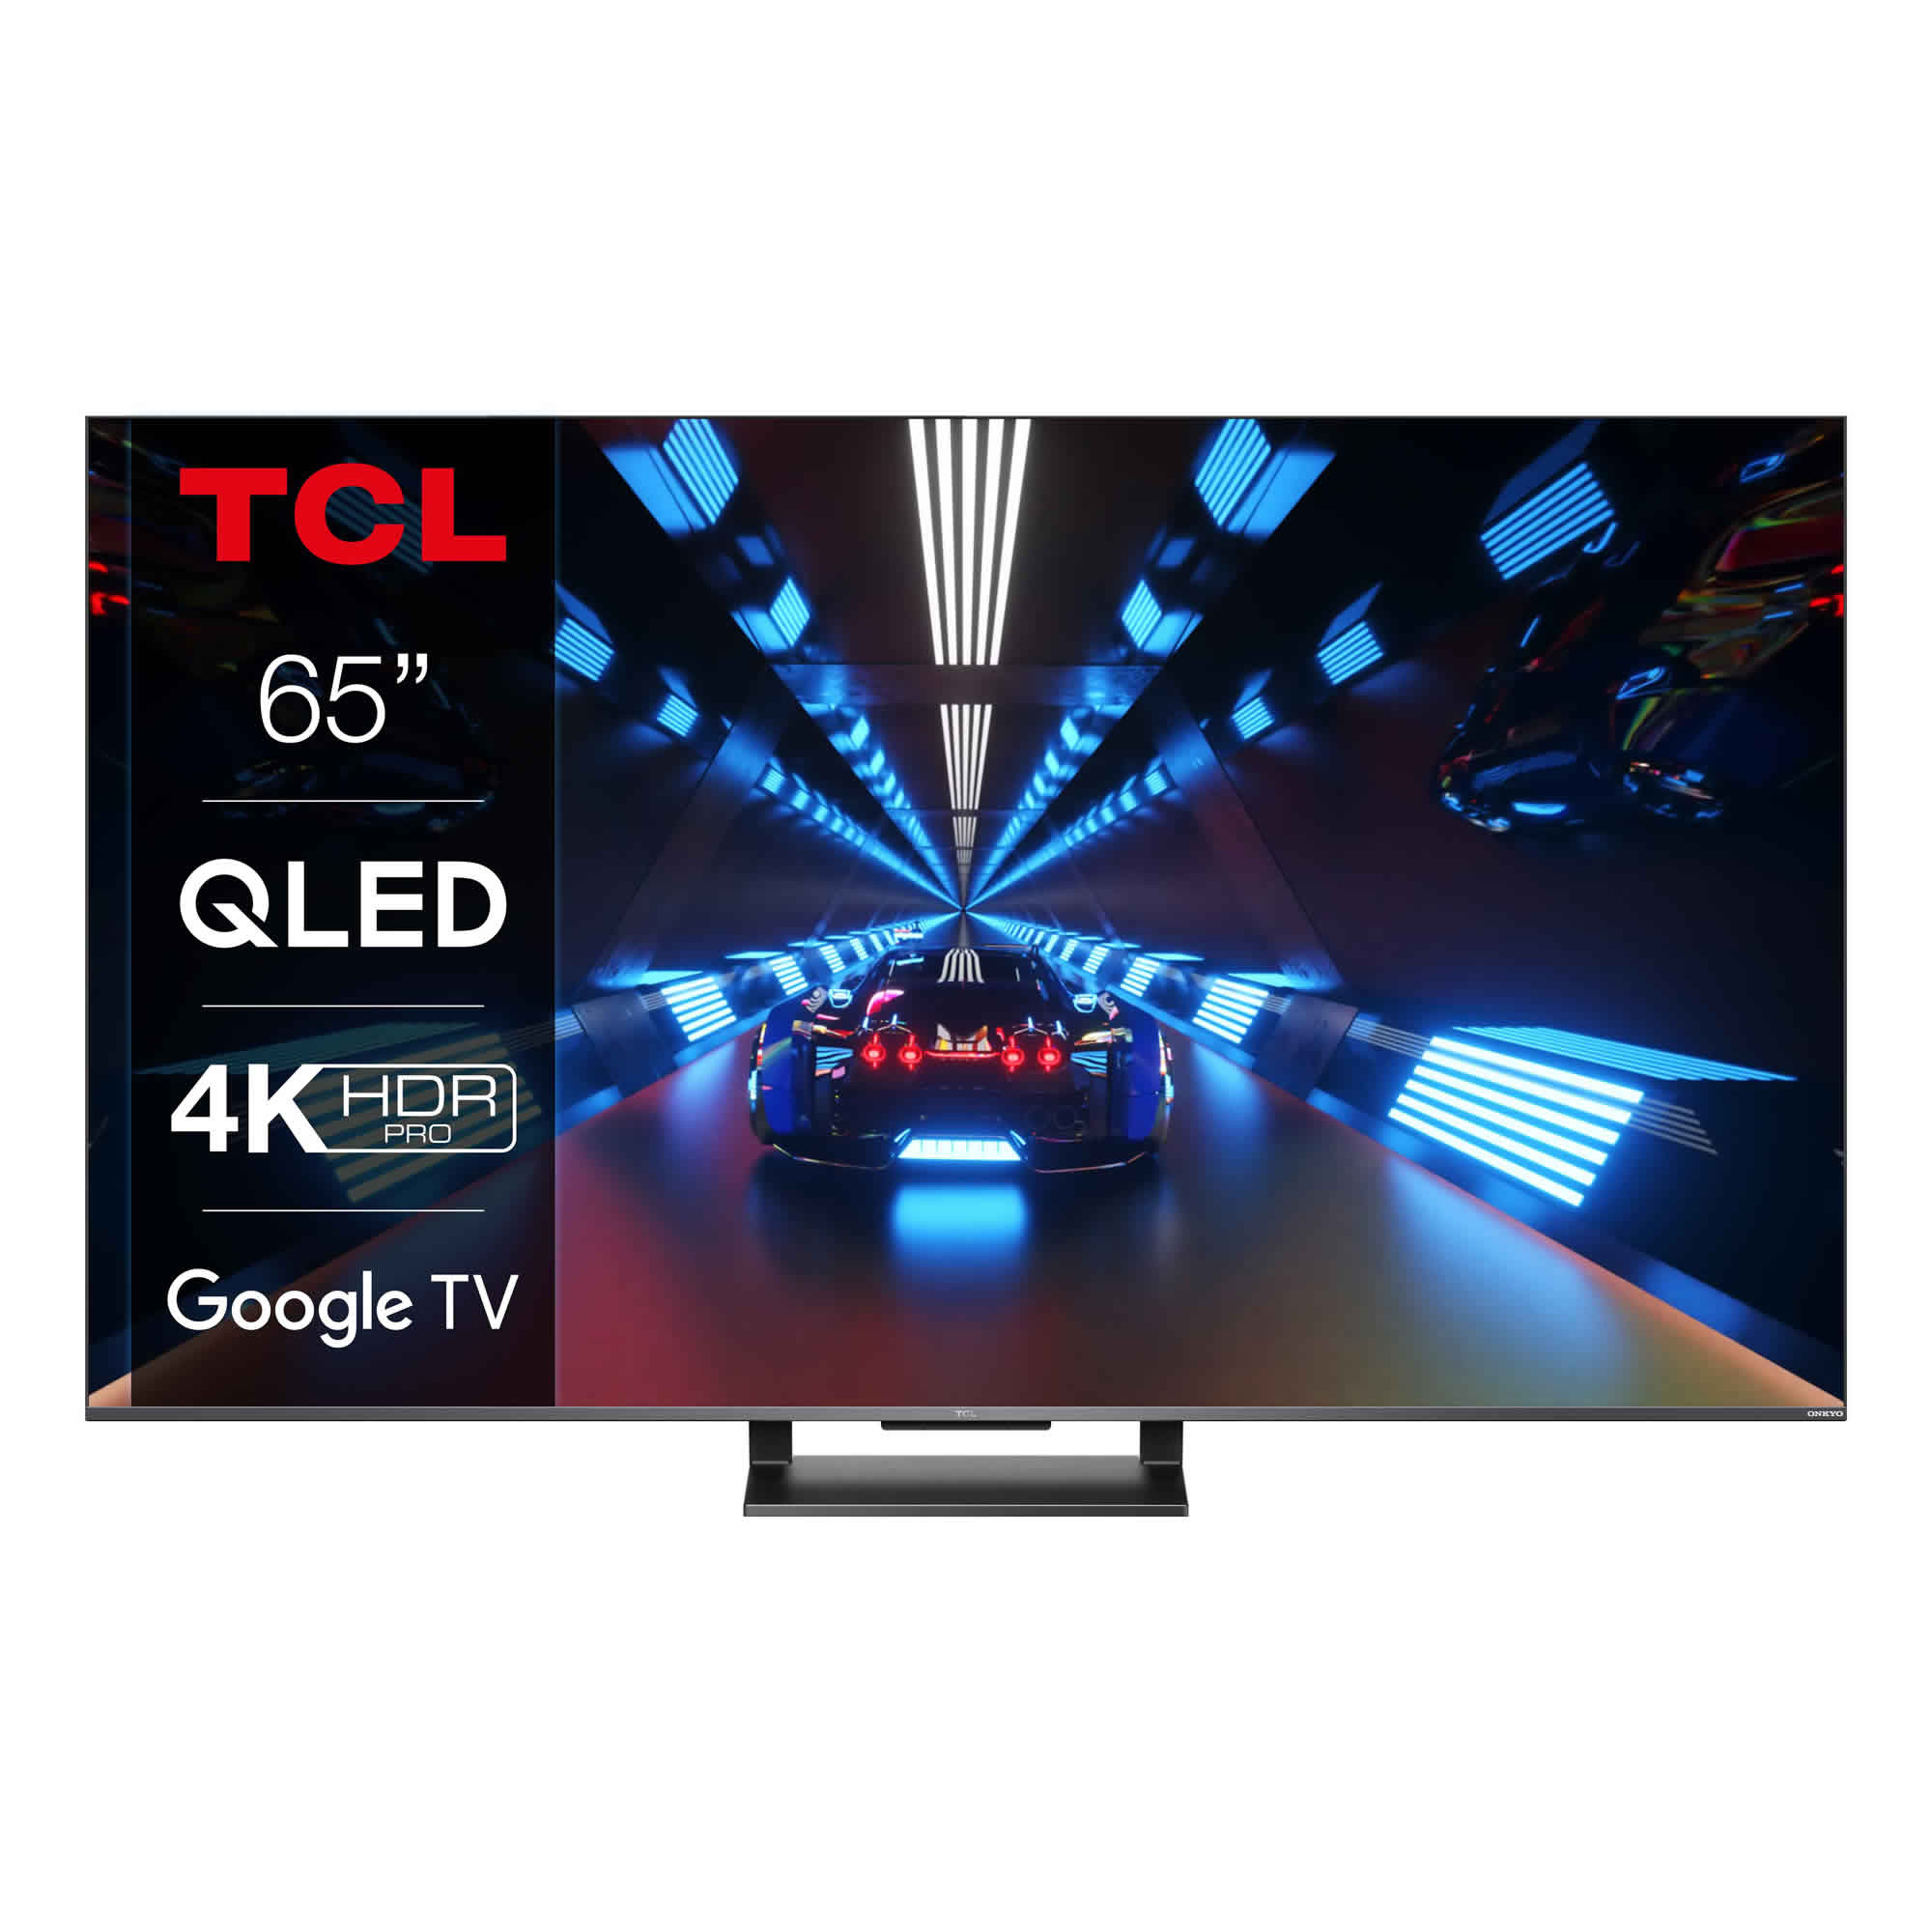 TCL 65inch 4K QLED SMART TV WiFi Freeview HD Google